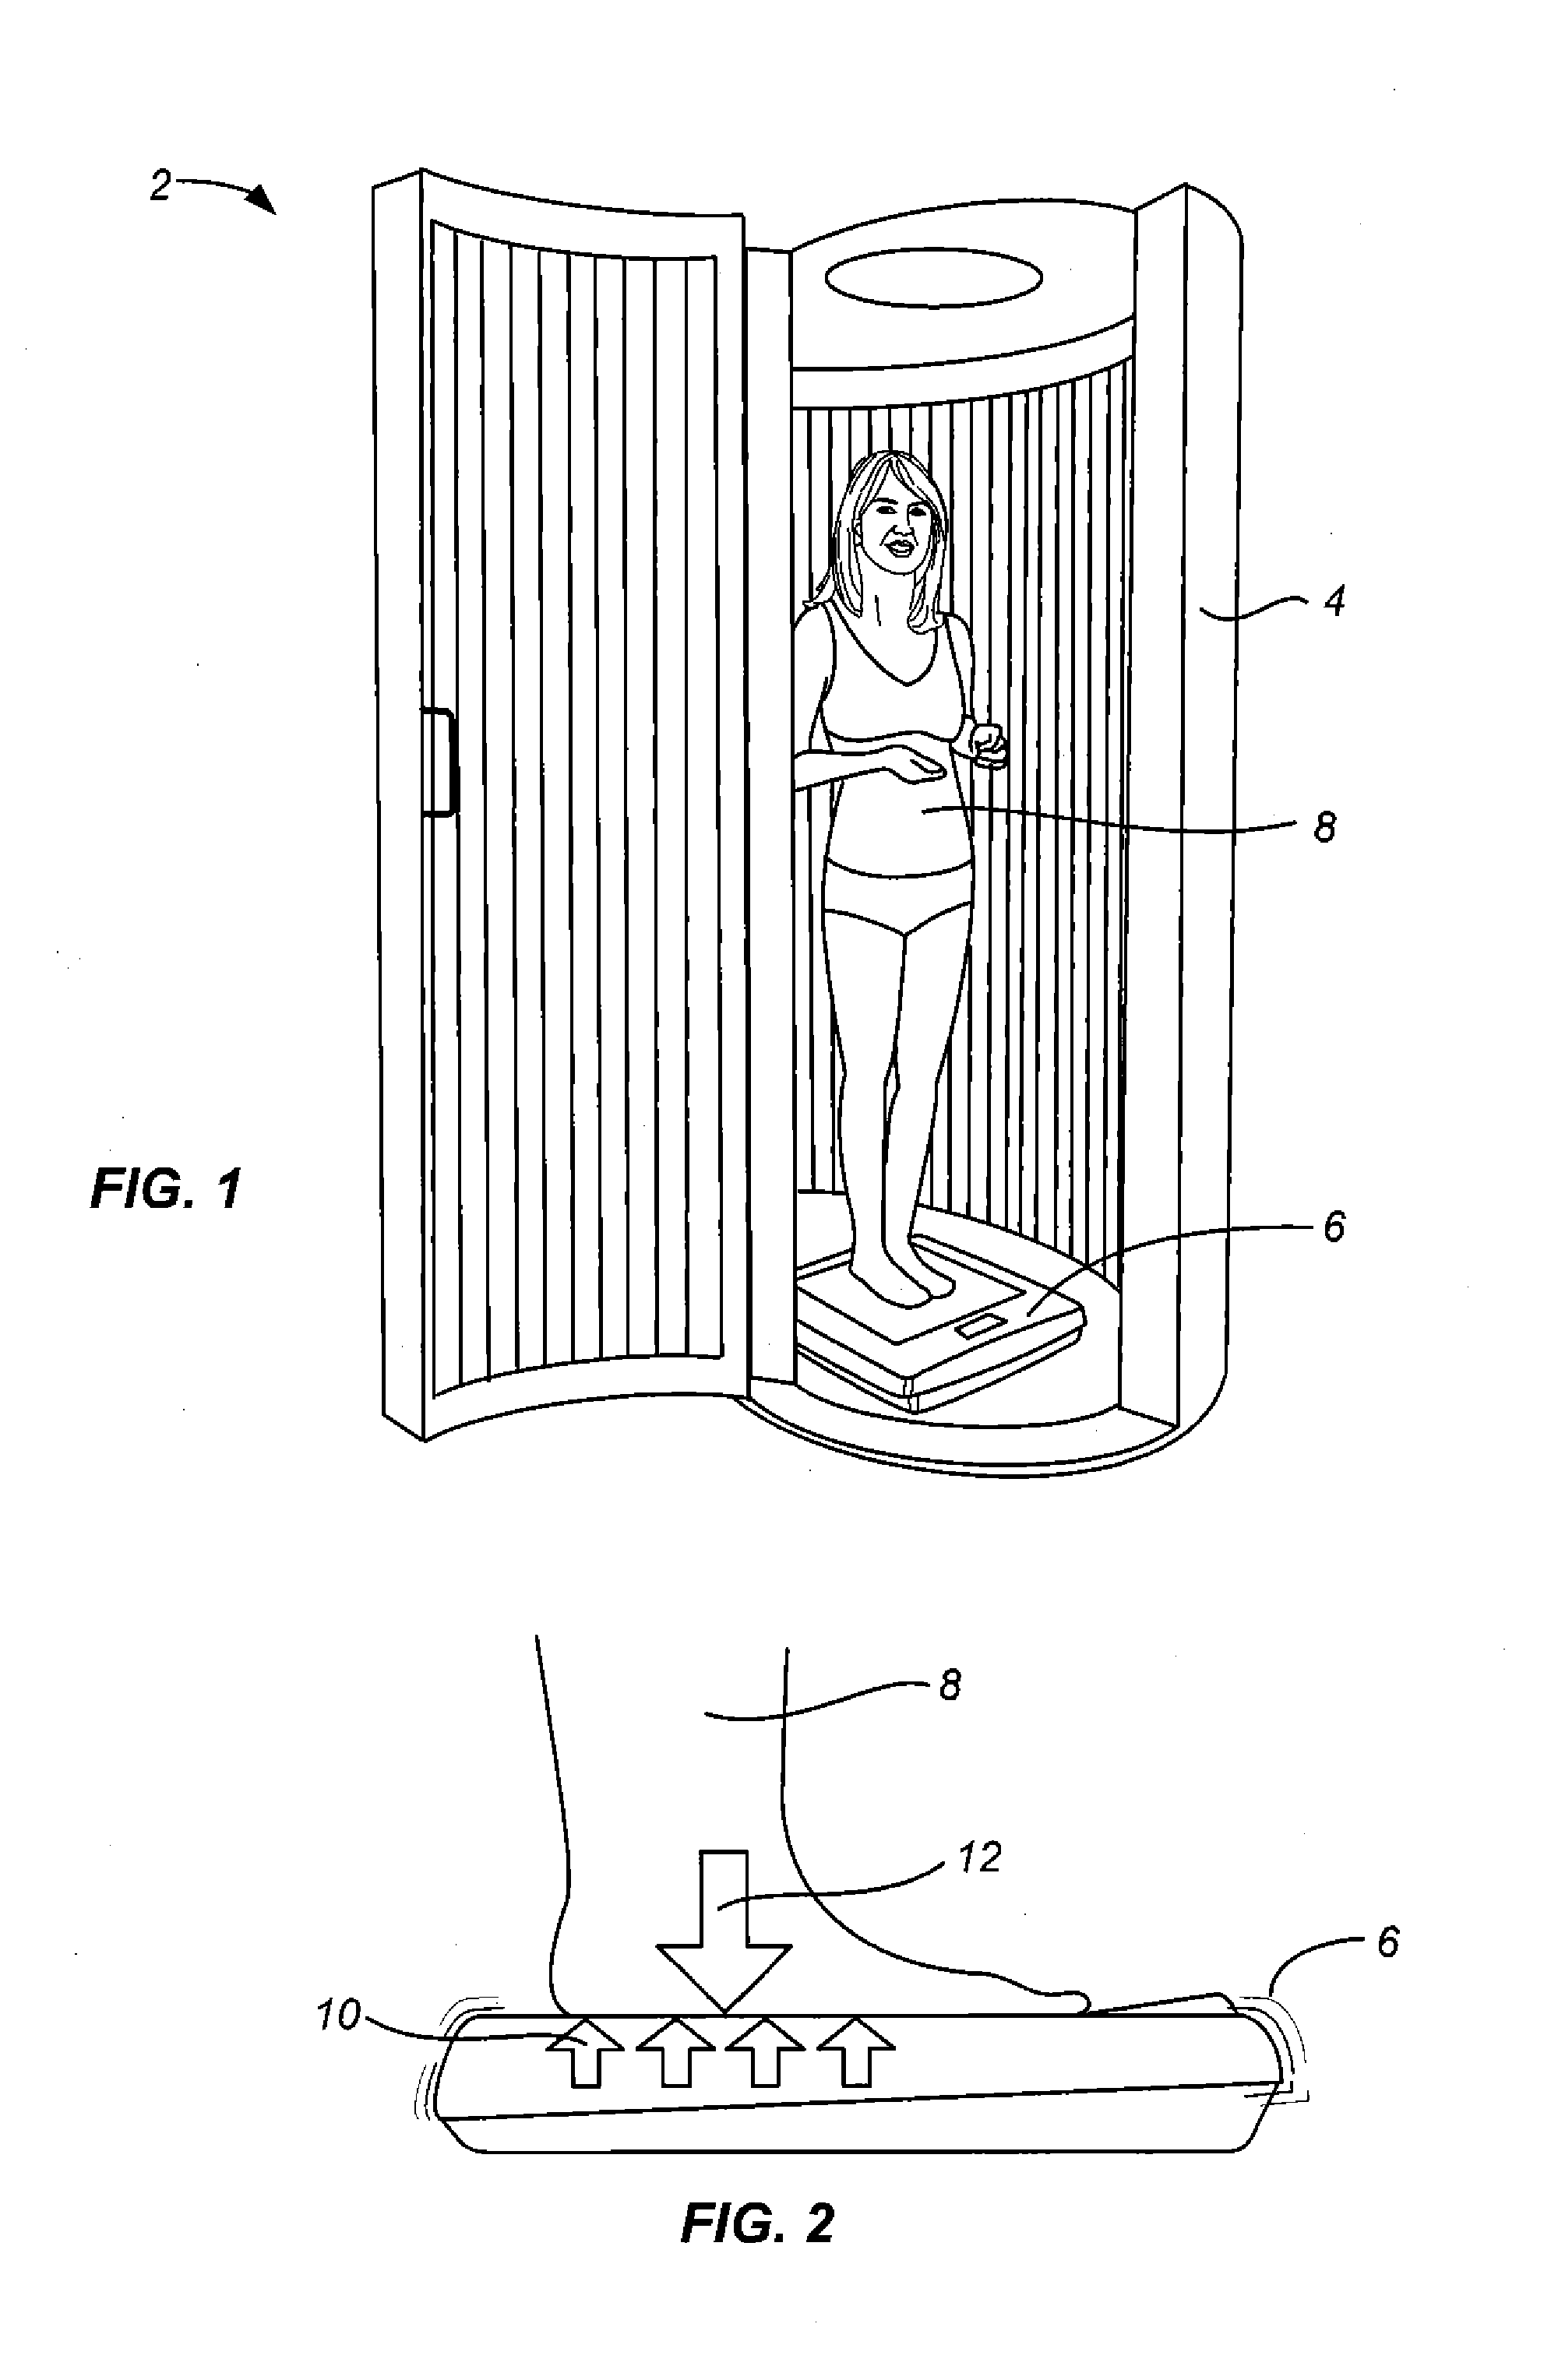 Apparatus for treating progressive muscle and bone loss